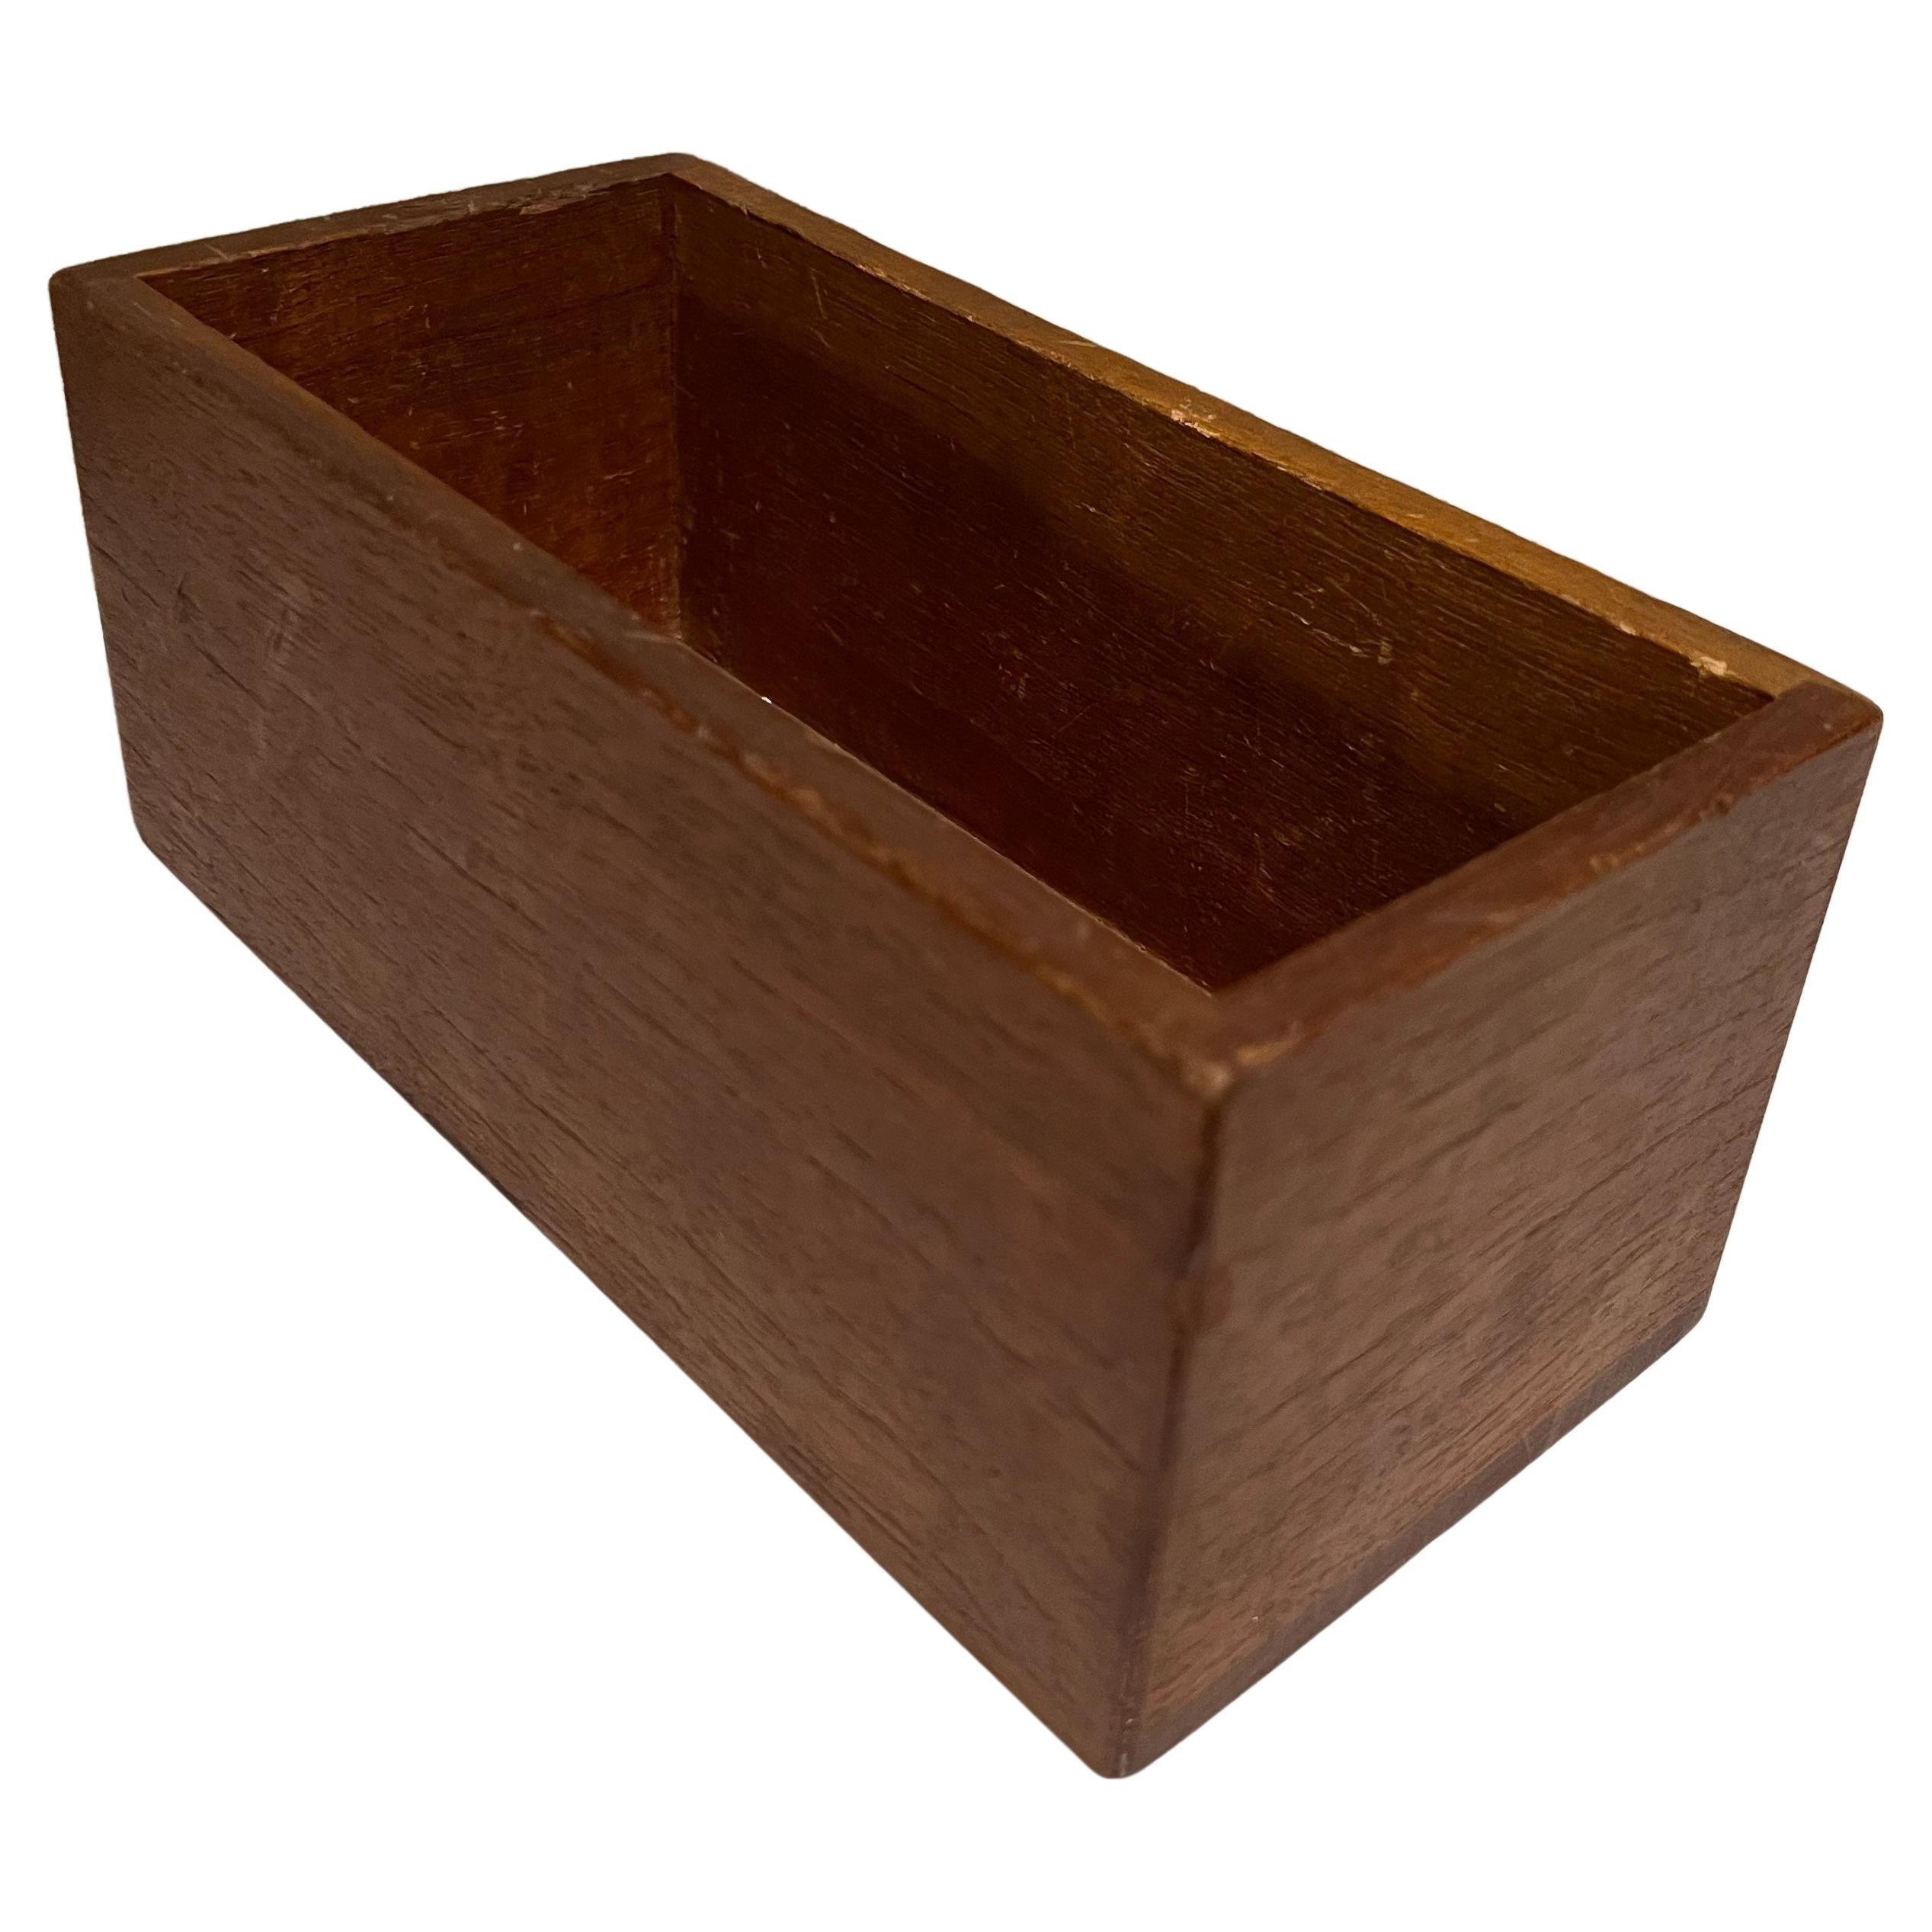 1960s Exotic Wood Simple Storage Box Ideal Cedar Catch All Minimalist Design
Old storage box looks like cedar. No lid or cover is present.
Measures :3.75 tall x 9 width x 4.5 depth
Original preowned vintage good condition.
See images provided